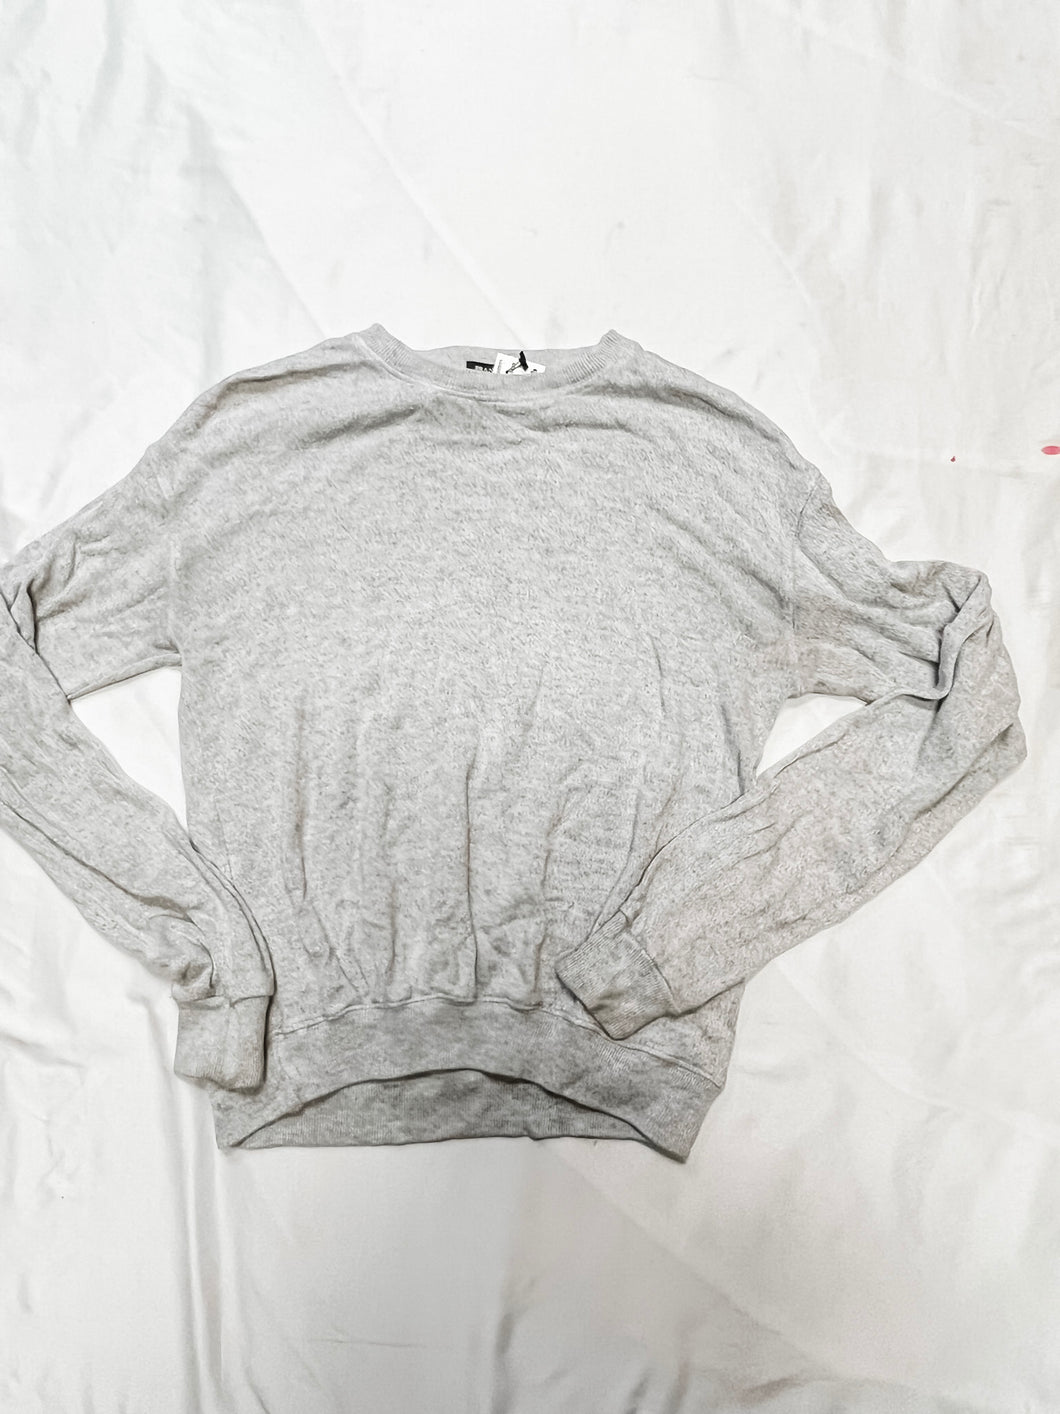 Brandy Melville Long Sleeve Top Size Small 2-M0741